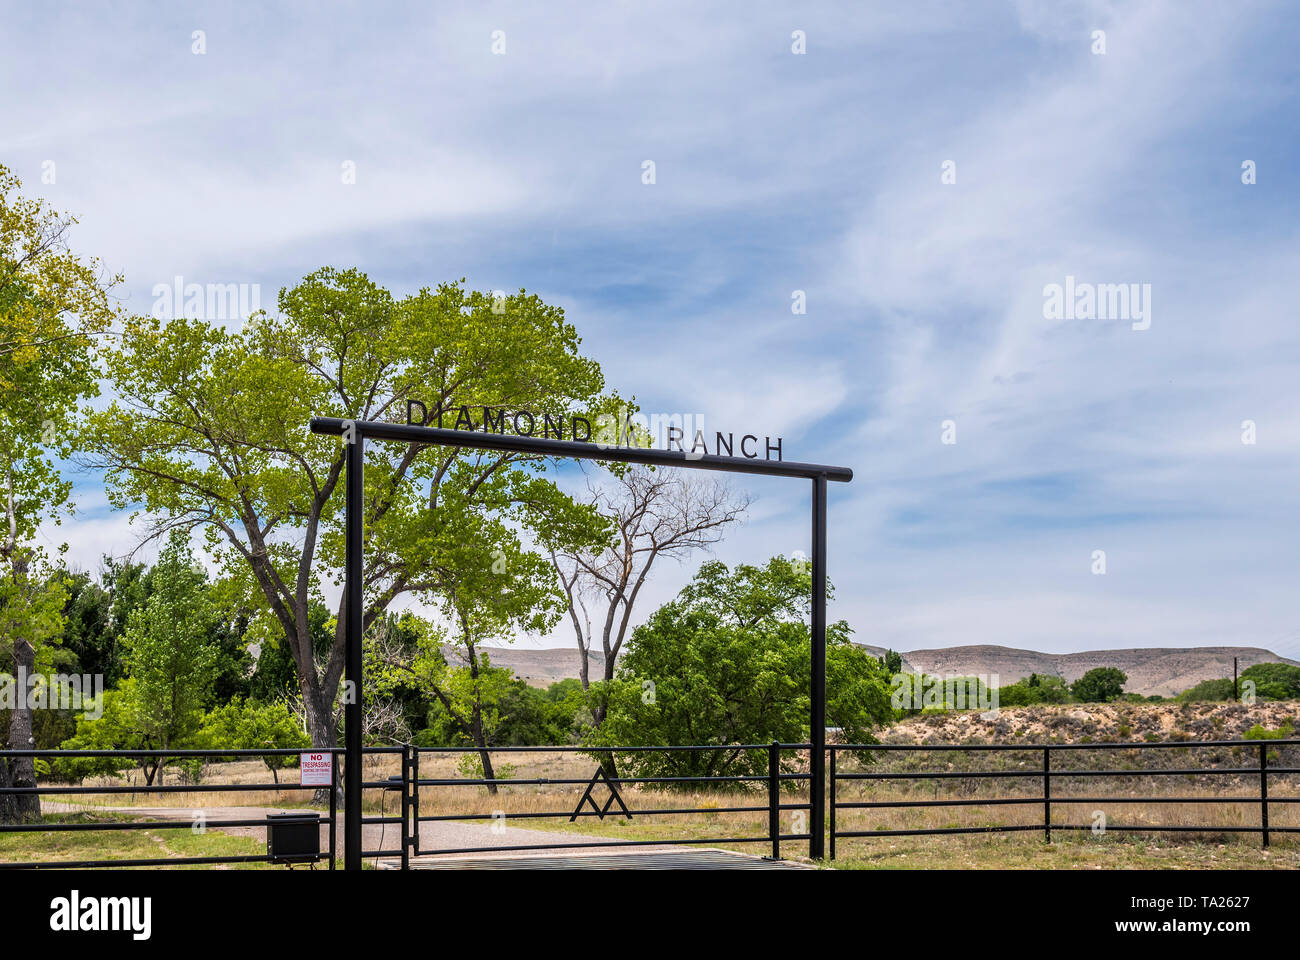 New Mexico ranch, the Diamond A Ranch in Lincoln County and Chaves County, New Mexico, USA. Stock Photo